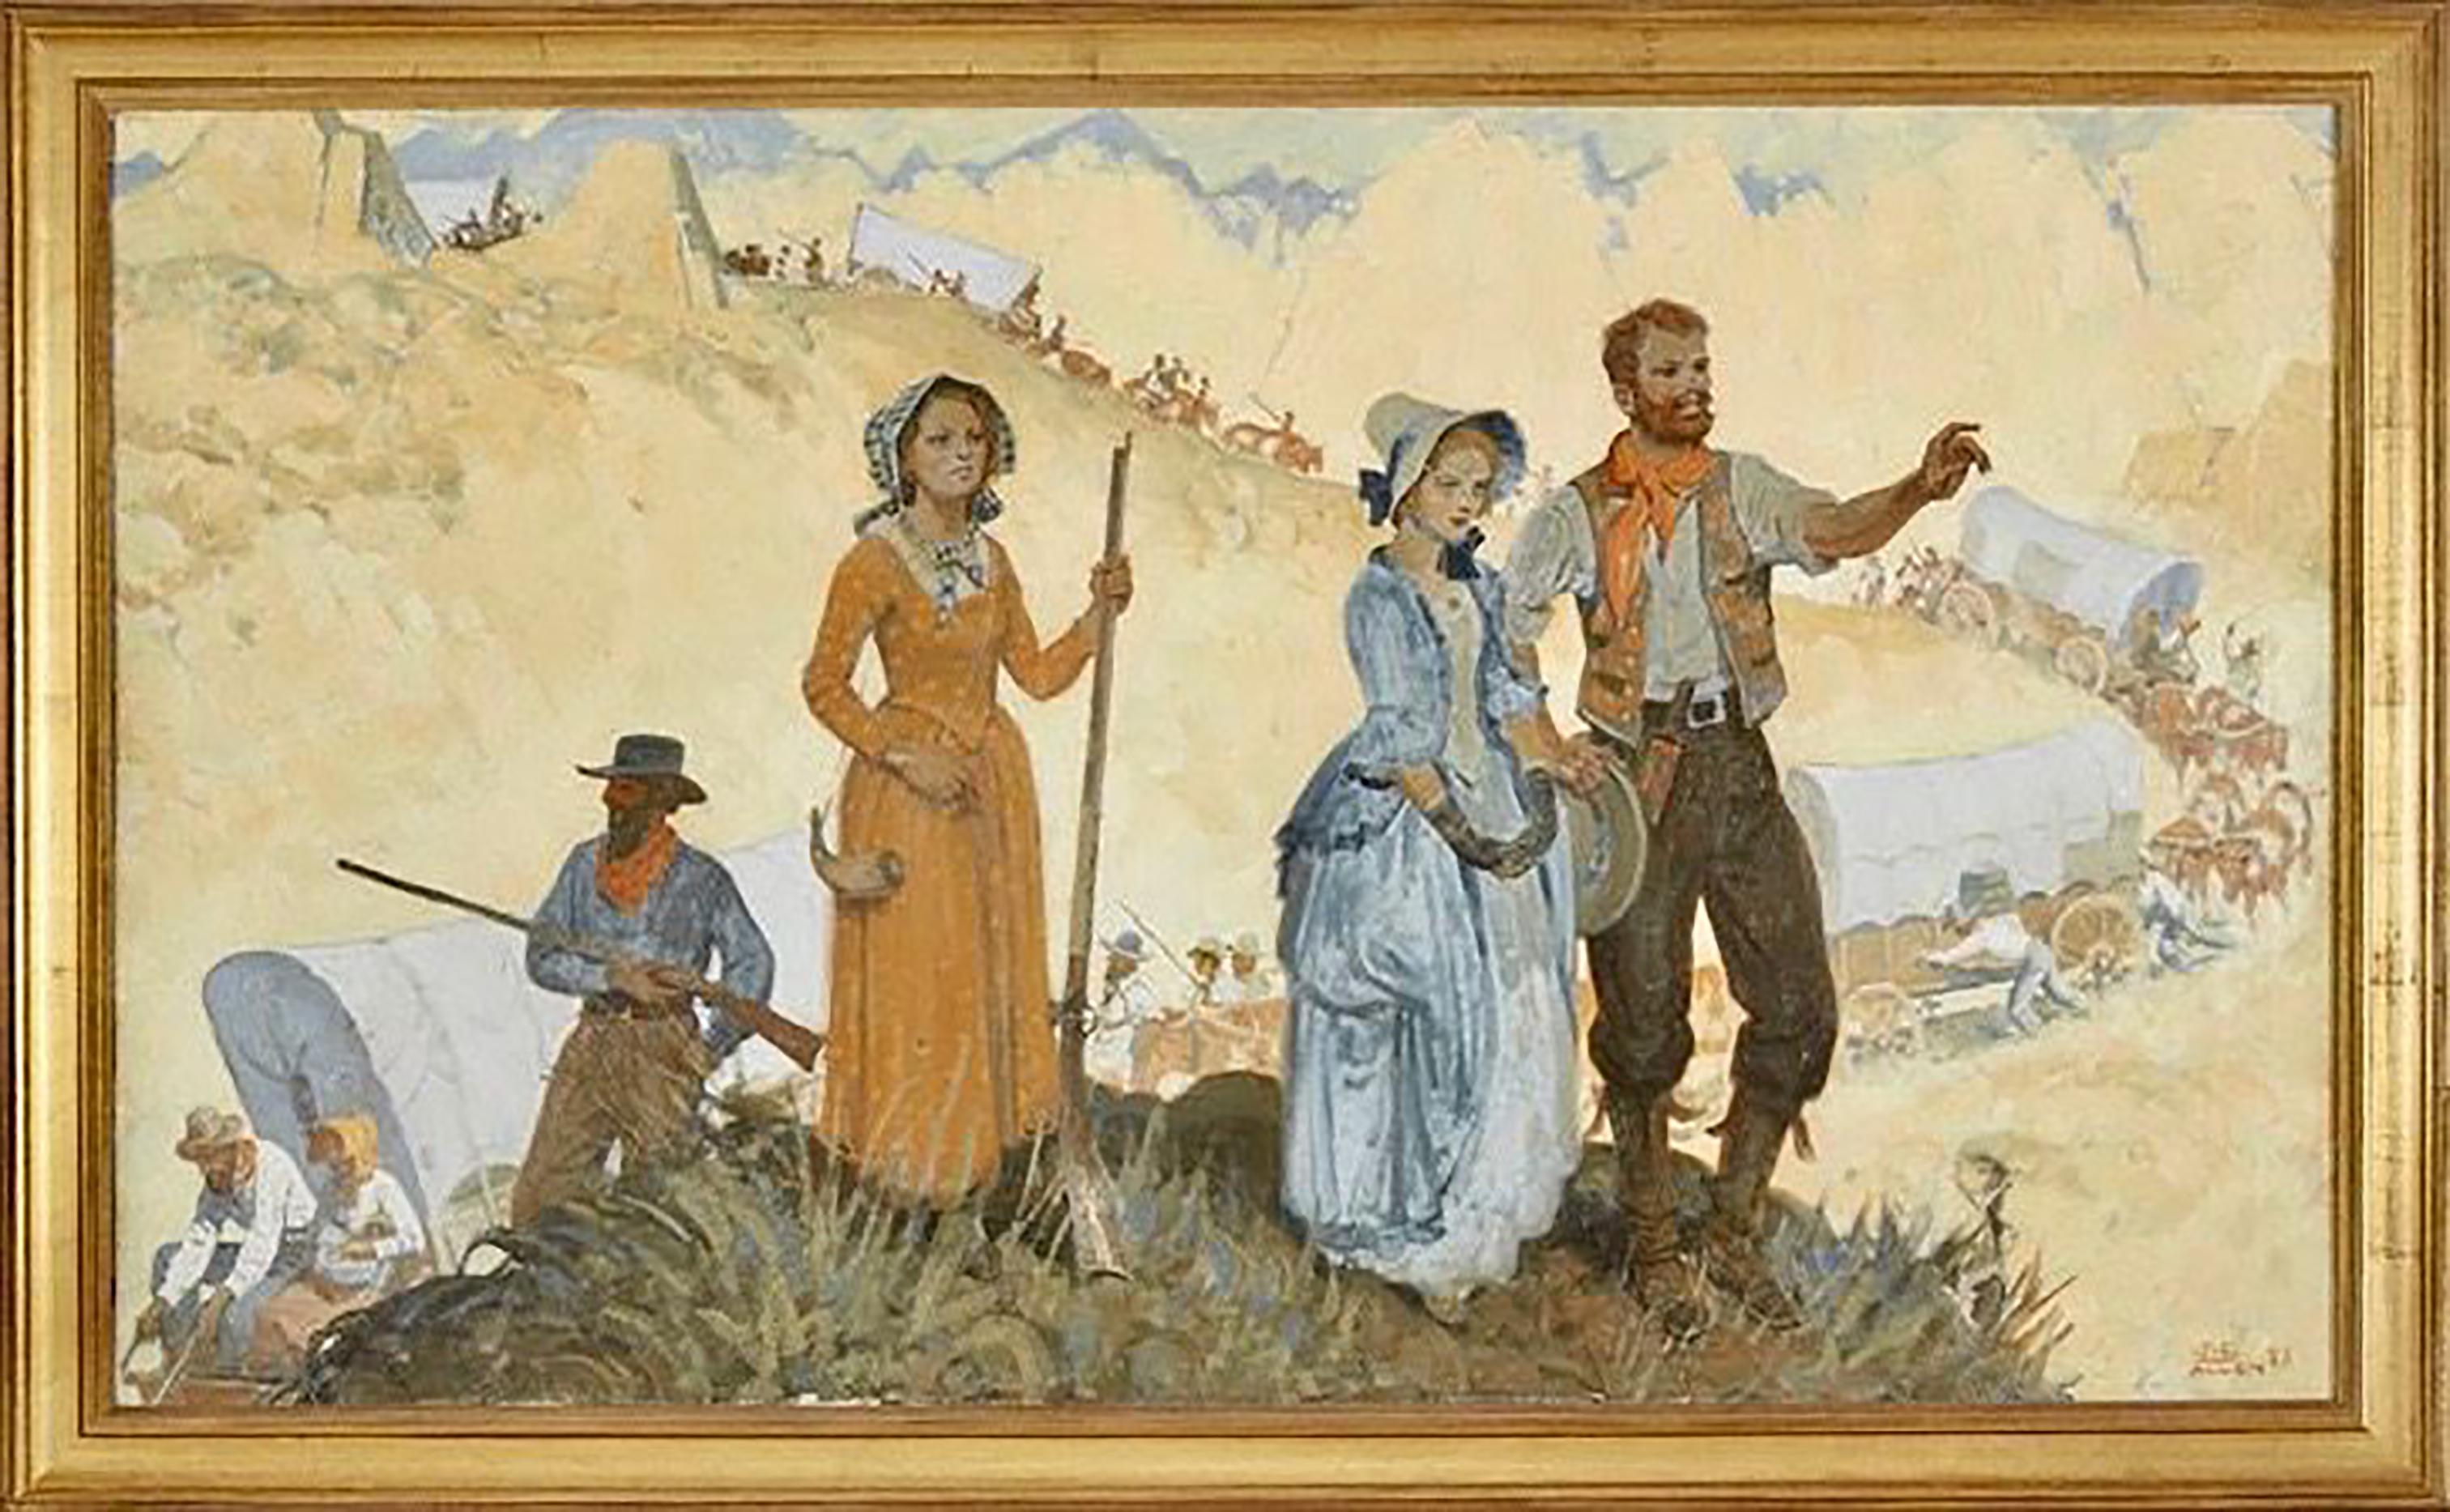 Settlers and Wagon Train, 1933 - Art by James Edmund Allen